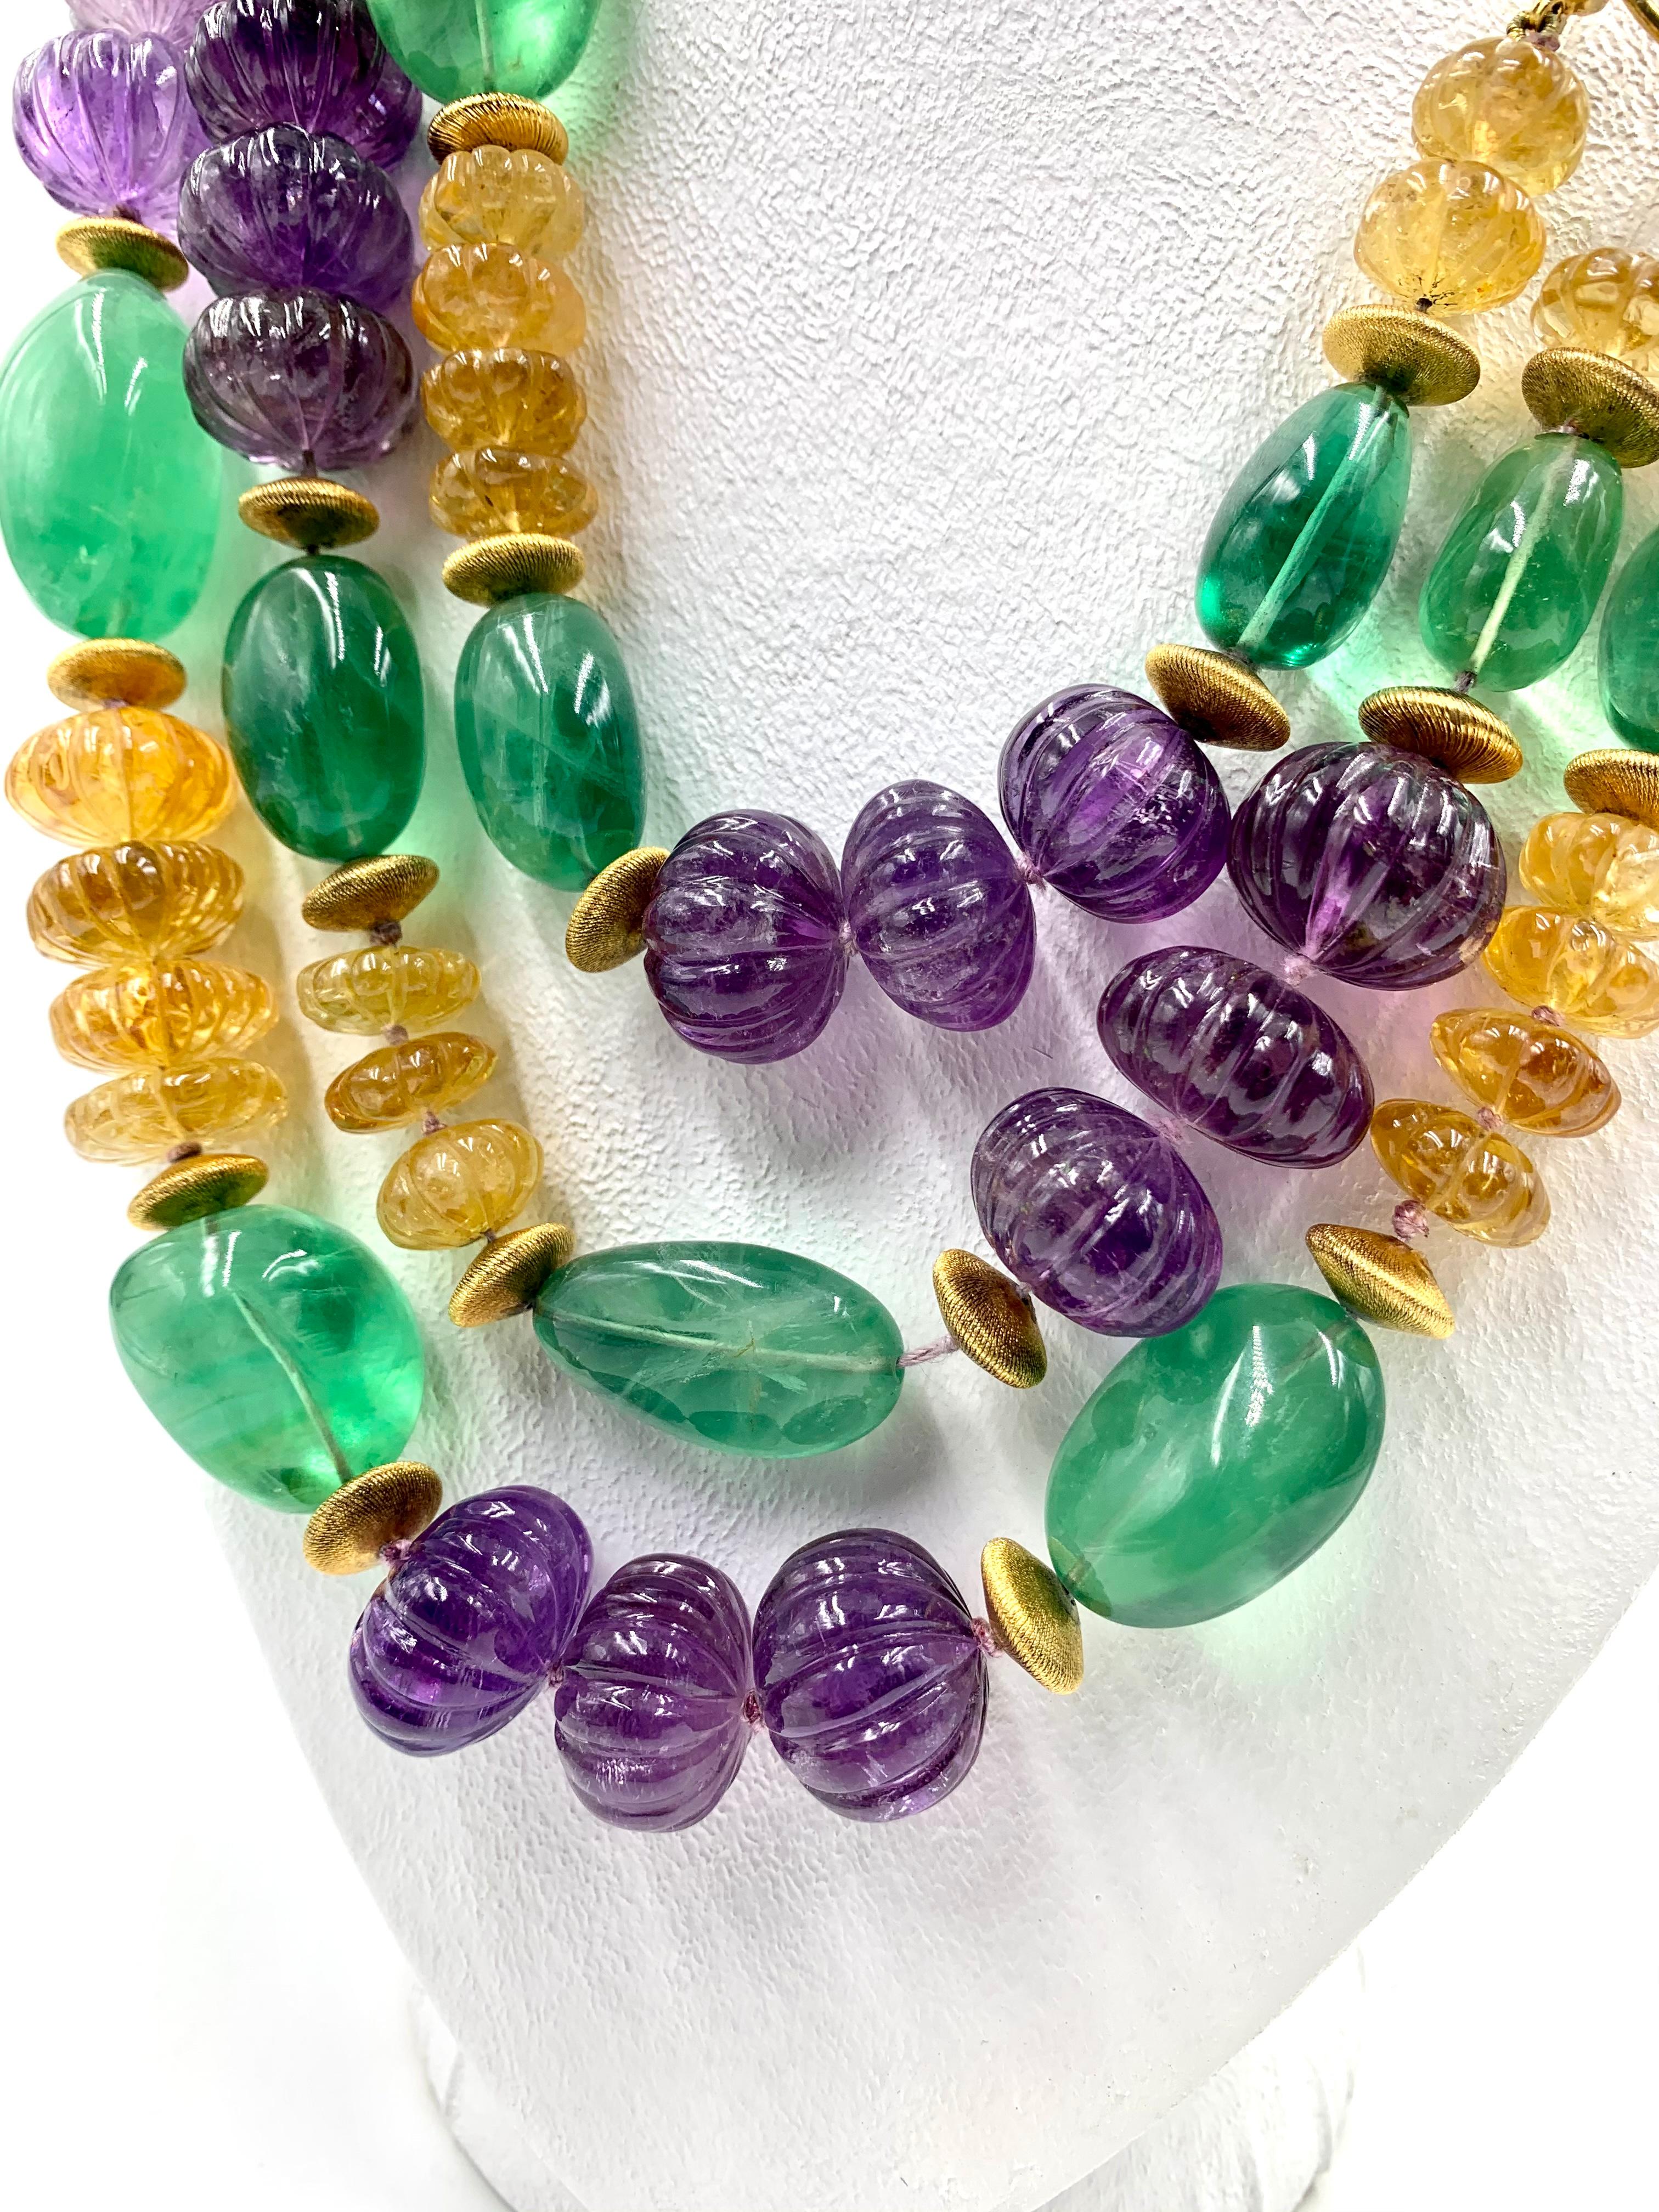 Oval Cut Vintage Iradj Moini Amethyst, Citrine, Fluorite and Gold-Plated Bead Necklace